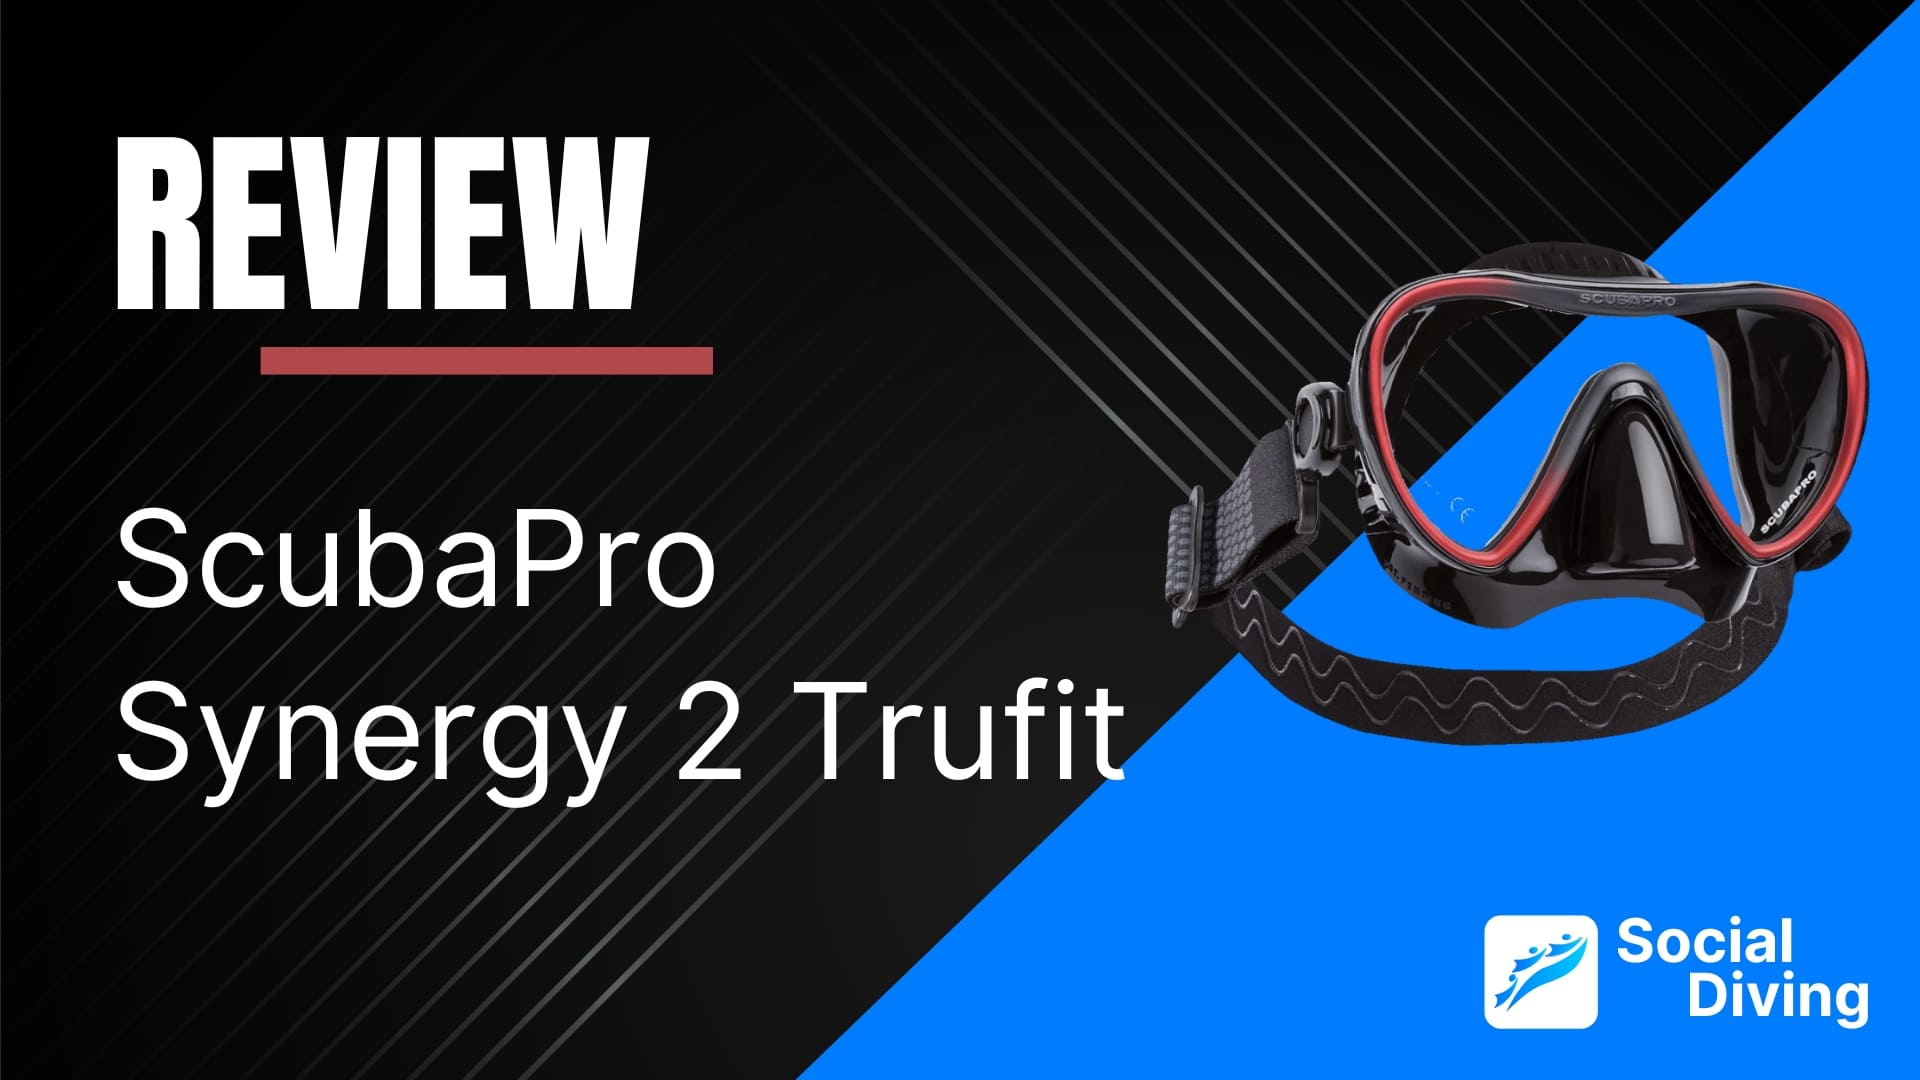 ScubaPro Synergy 2 Trufit review